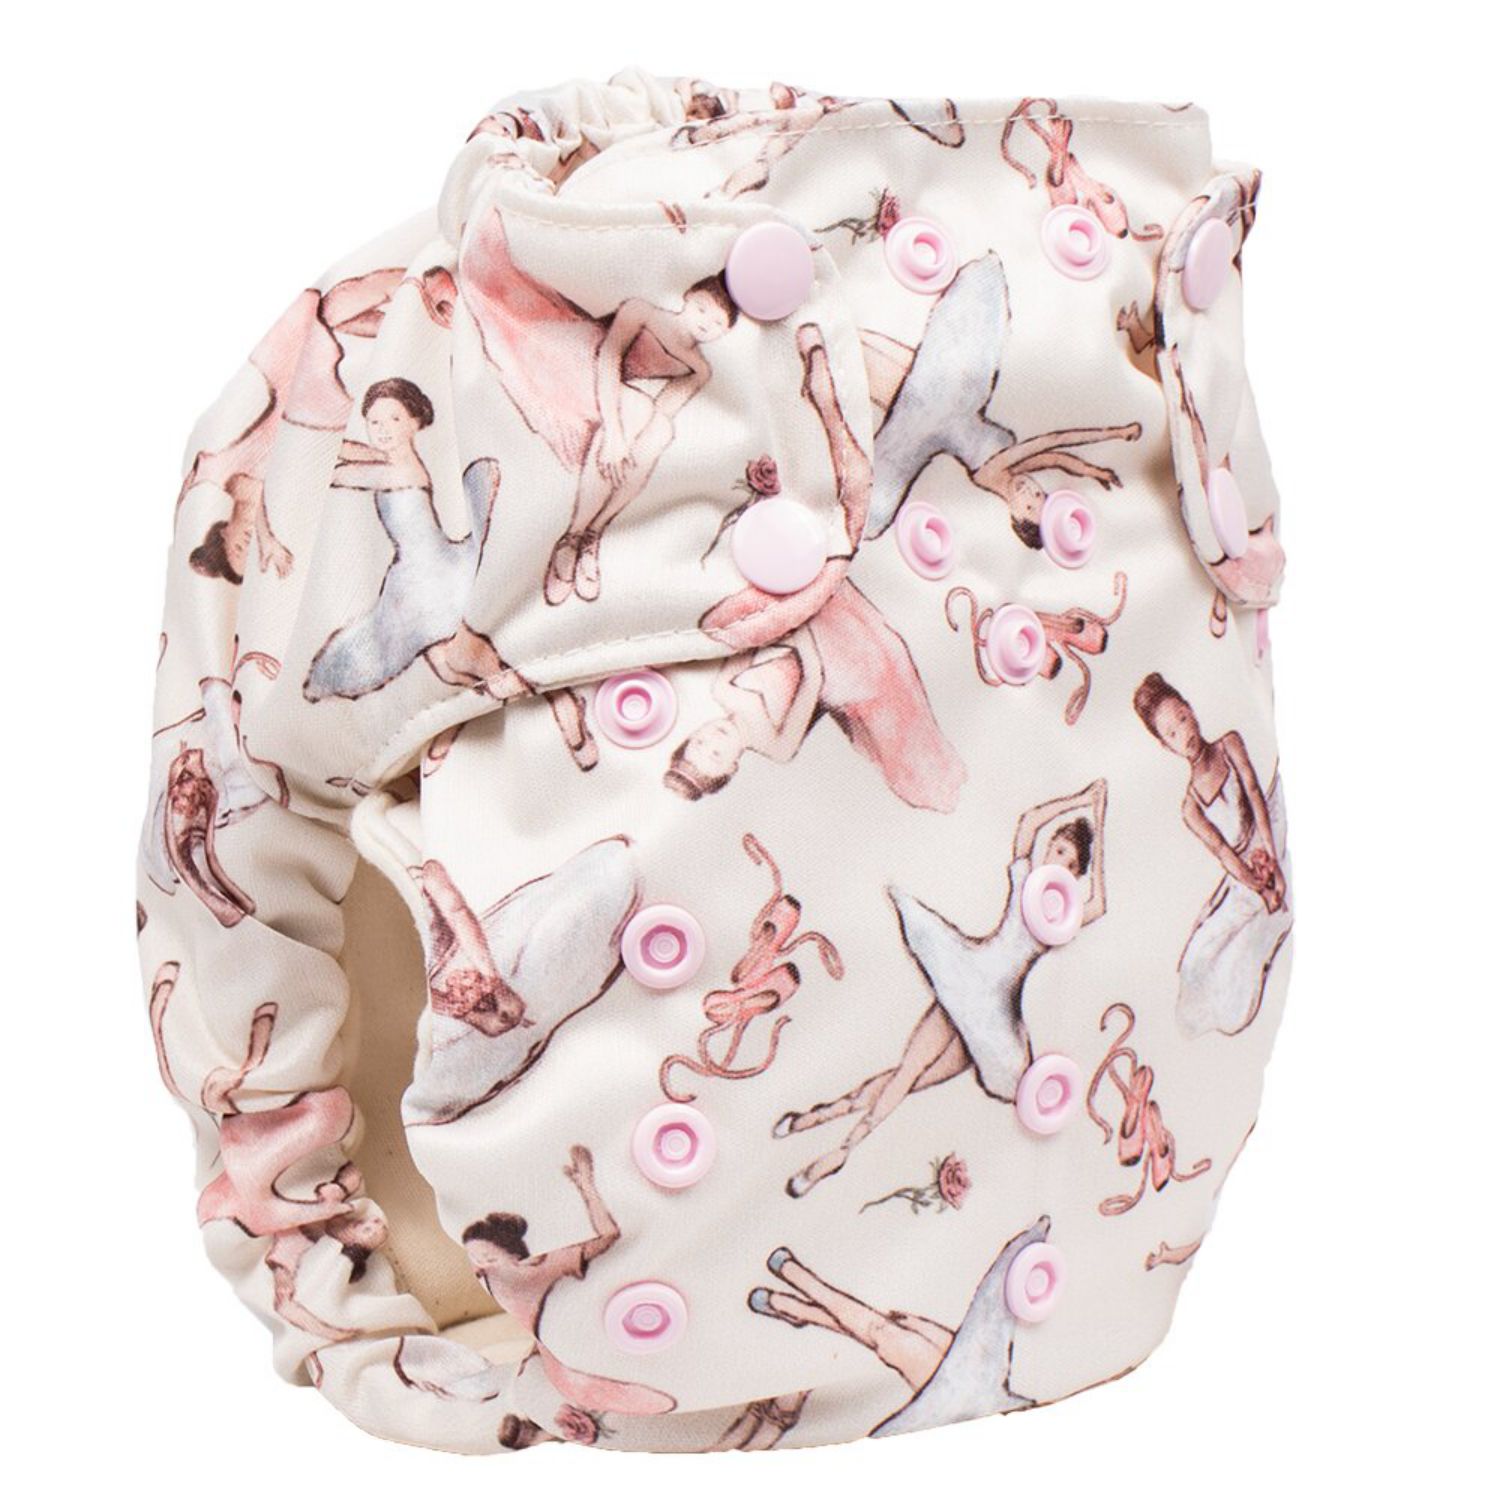 Smart Bottoms 3.1 One Size All-in-One nappy Pattern: Little Dancers